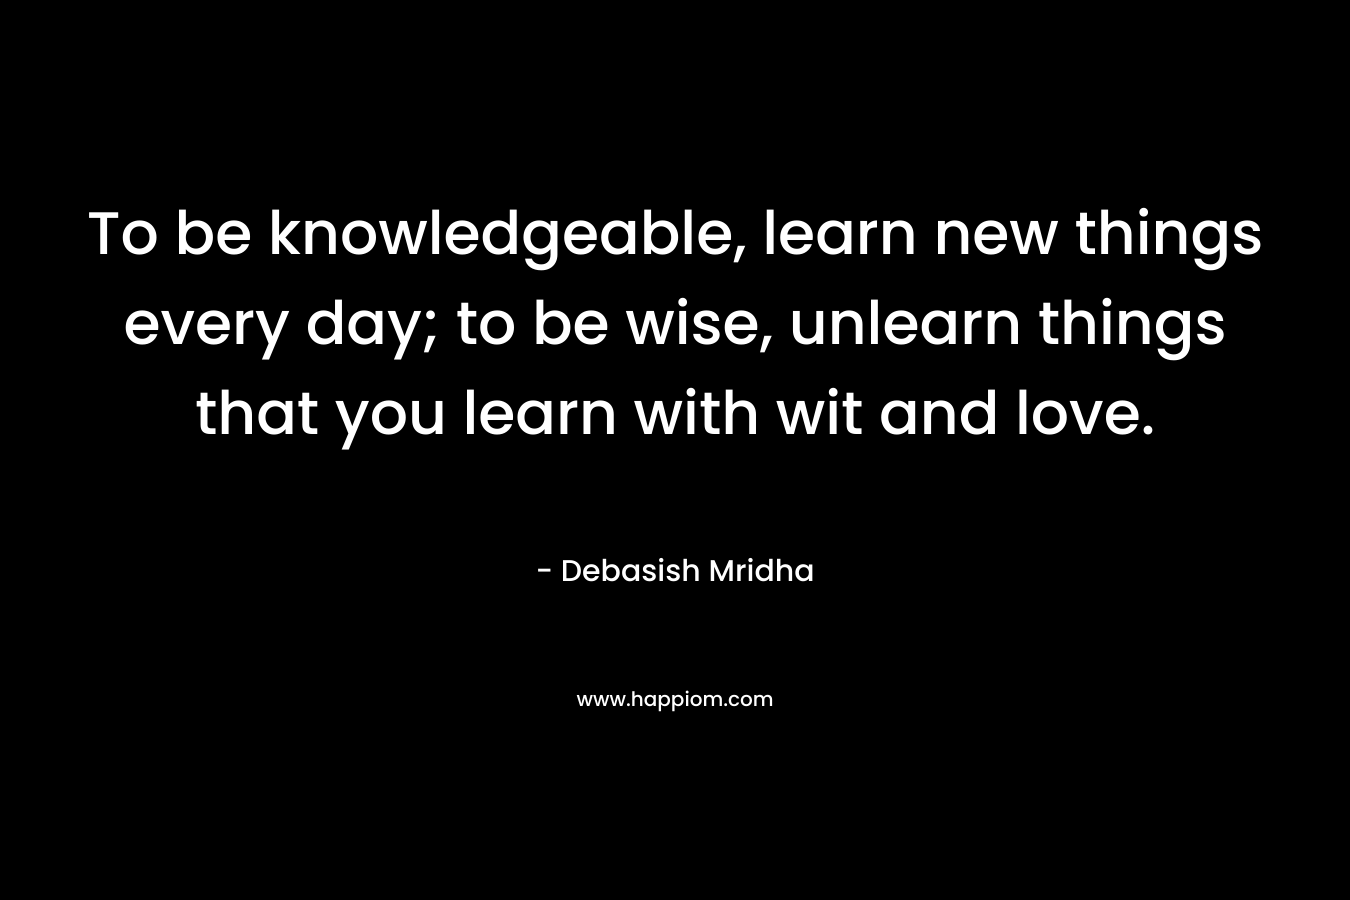 To be knowledgeable, learn new things every day; to be wise, unlearn things that you learn with wit and love.